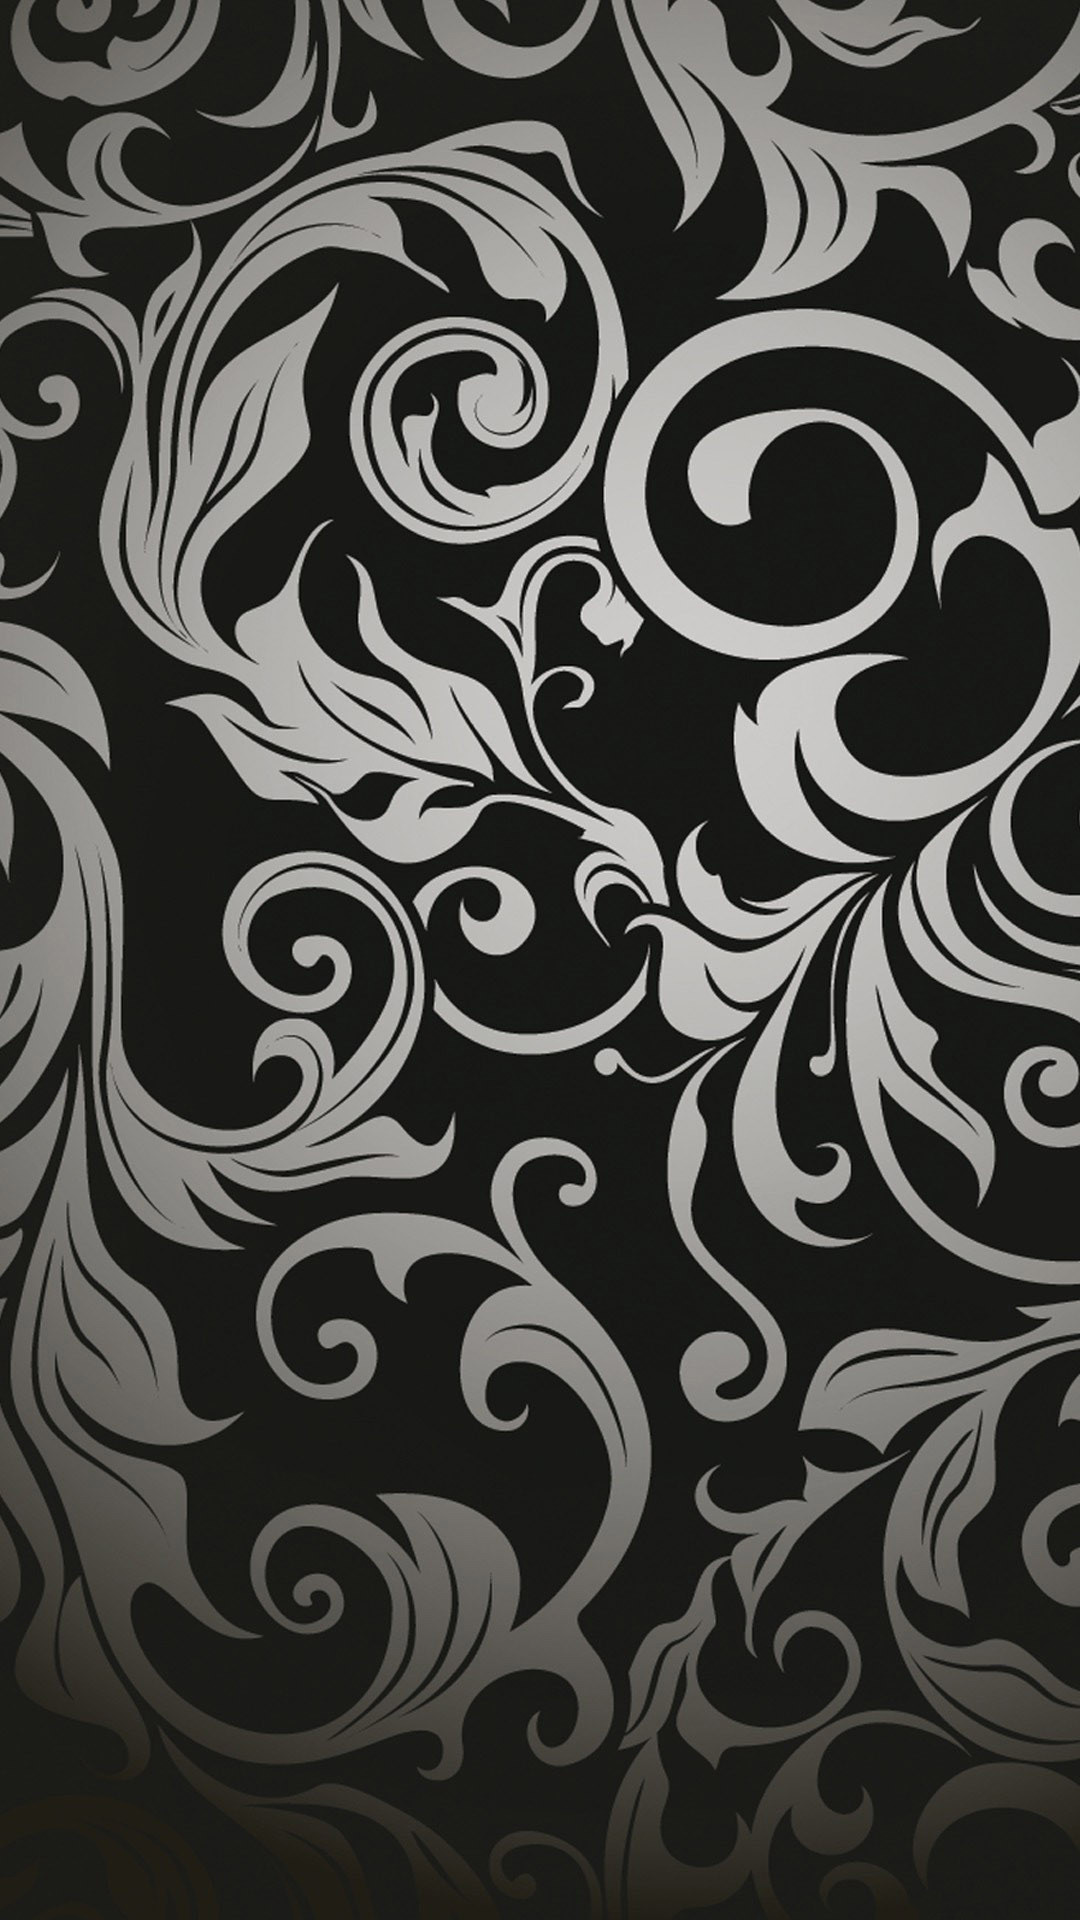 1080x1920 Black And White Abstract Wallpapers / Image Source